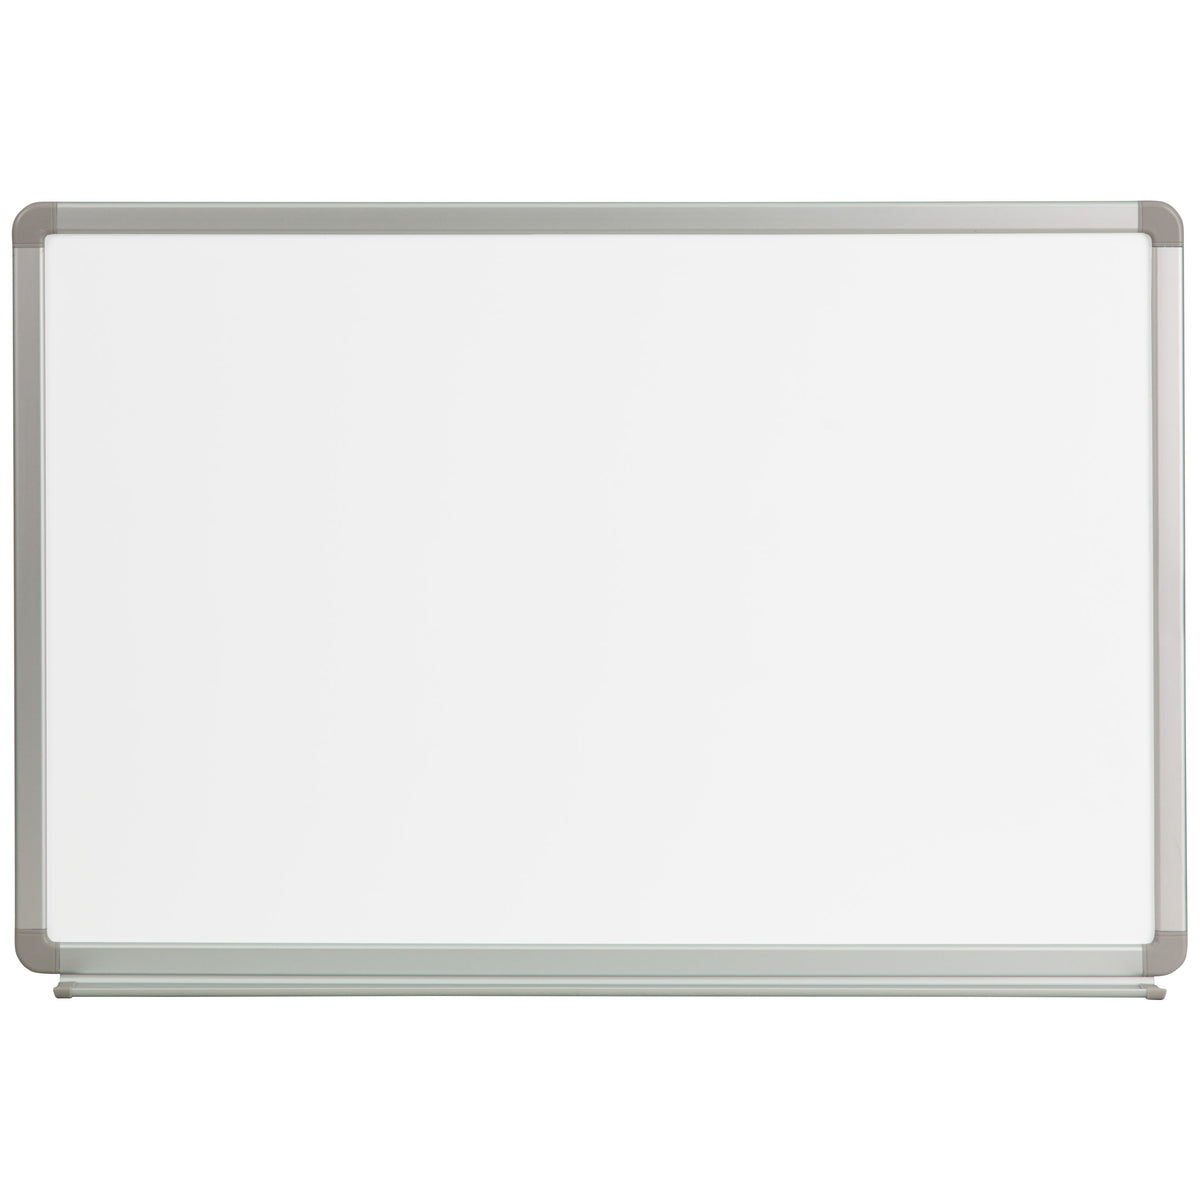 3' W x 2' H Magnetic Marker Board with Galvanized Aluminum Frame